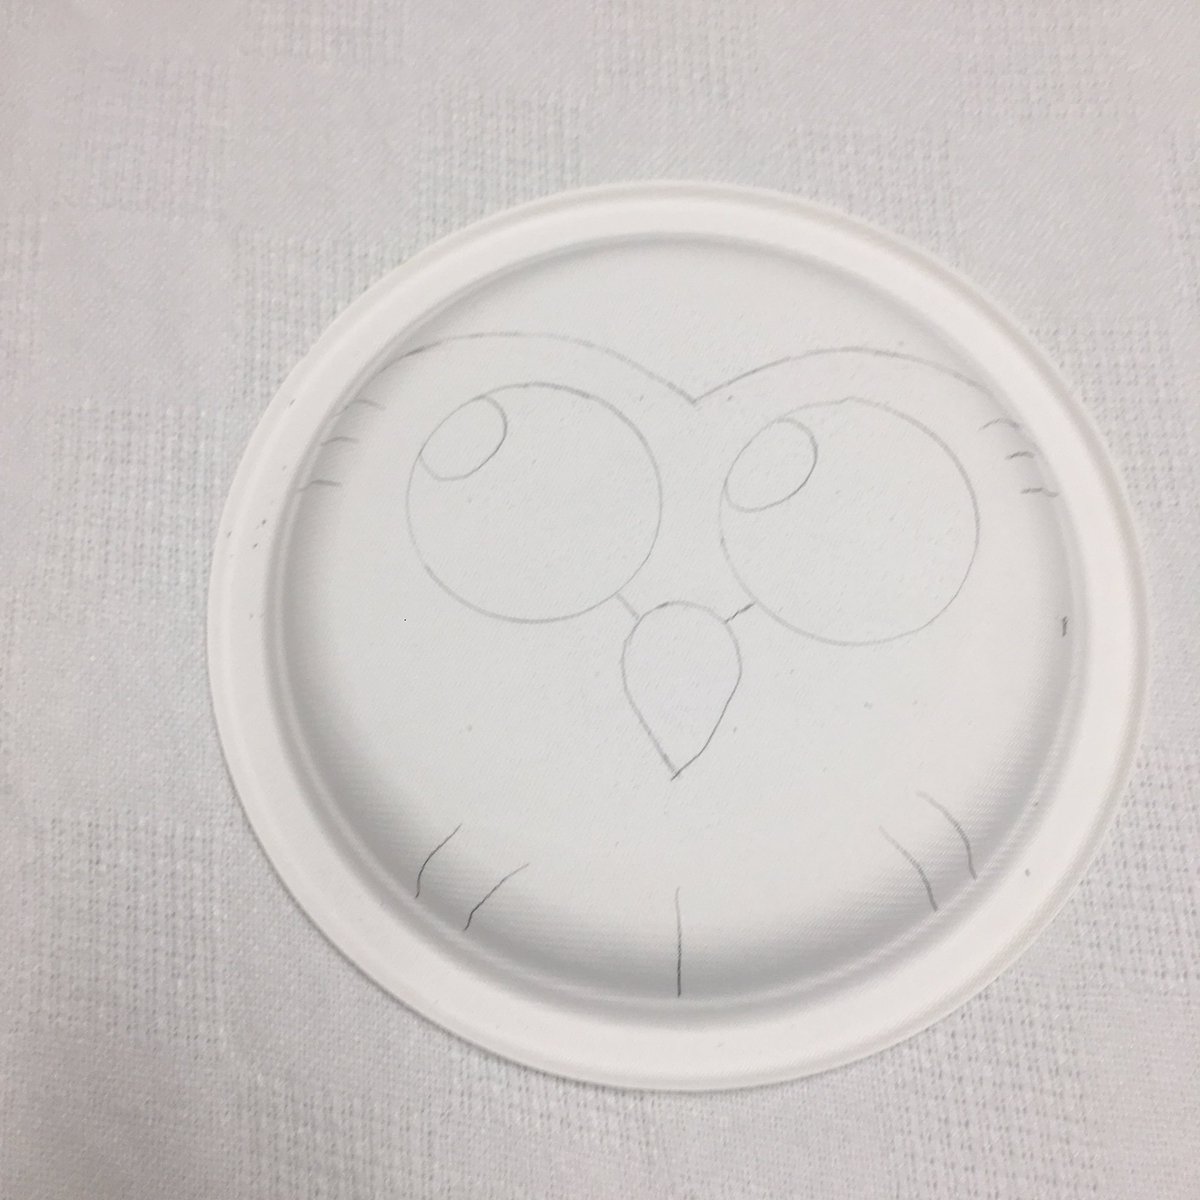 Next, drew on the Hooty basics in pencil. The eyes on this one are a tad big. I used the base of a styrofoam cup to draw the circles, and it was a bigger cup than the original one I had used. No matter! It’ll all be painted over, but this way it’s like a color by number! XD